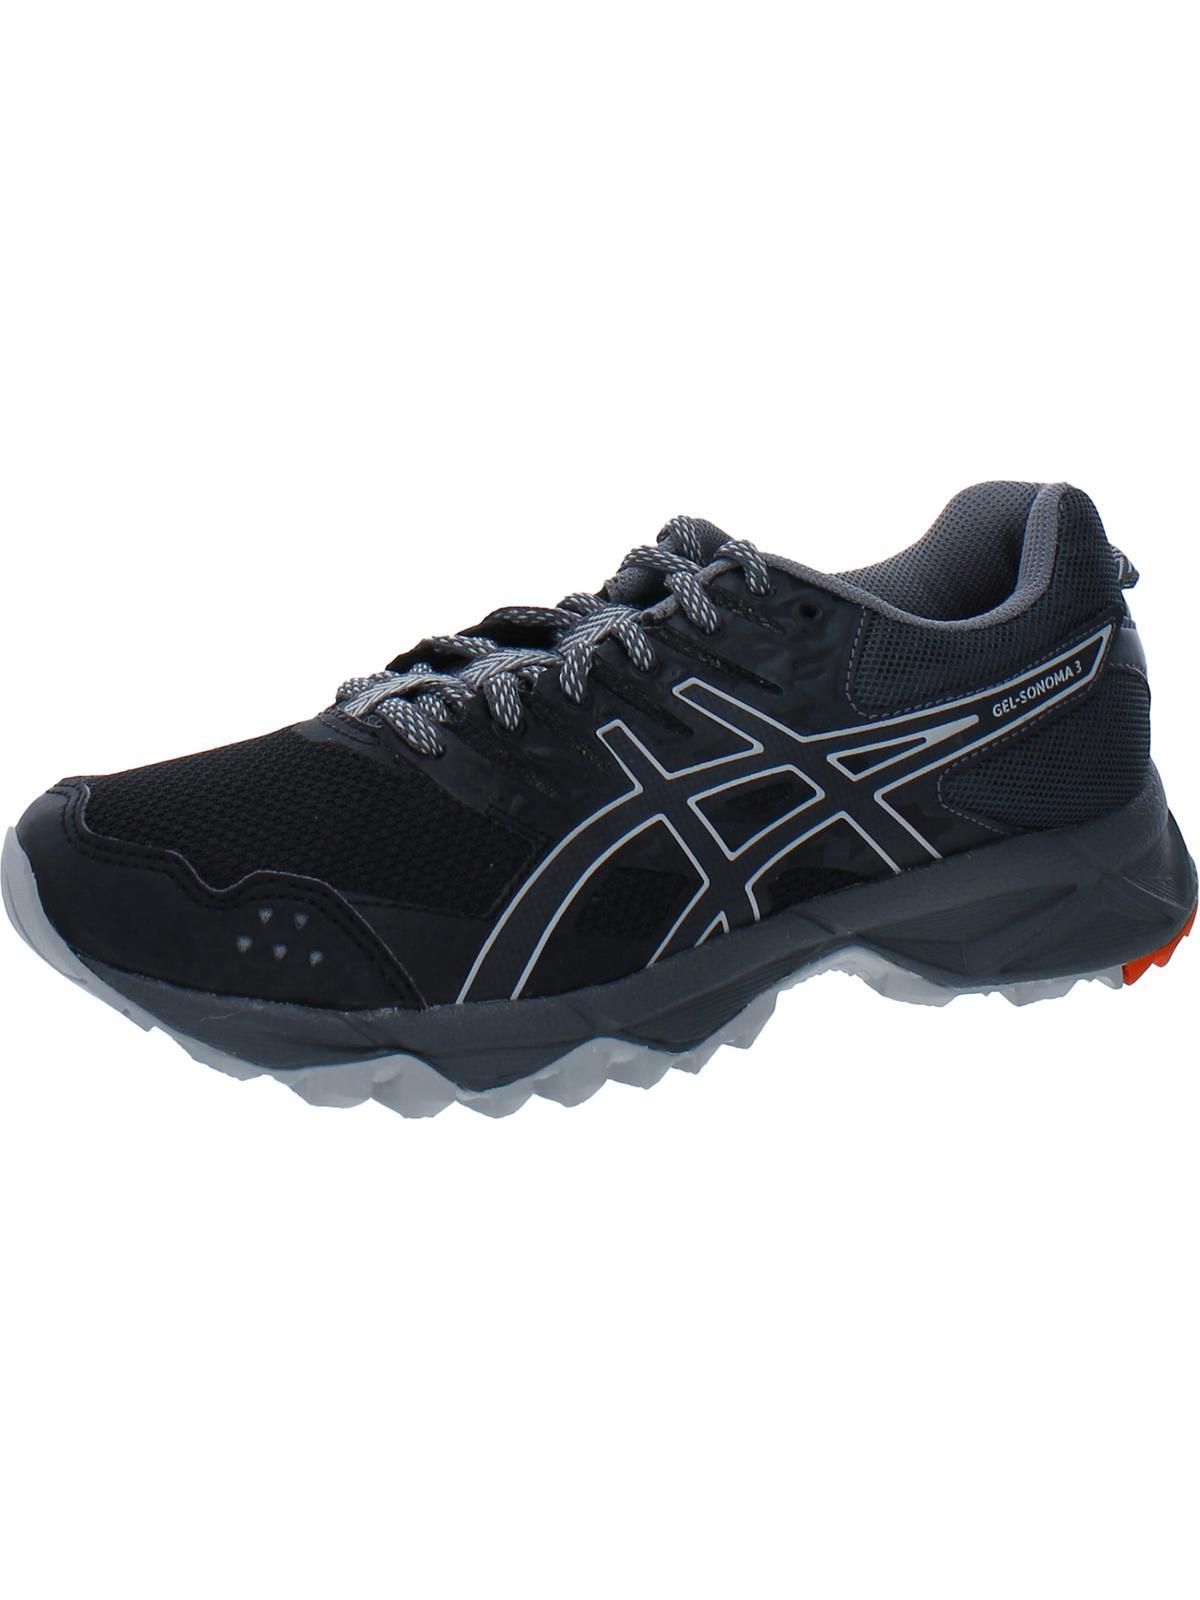 Asics Gel Sonoma 3 Sneakers Ortholite Running Shoes in Blue | Lyst